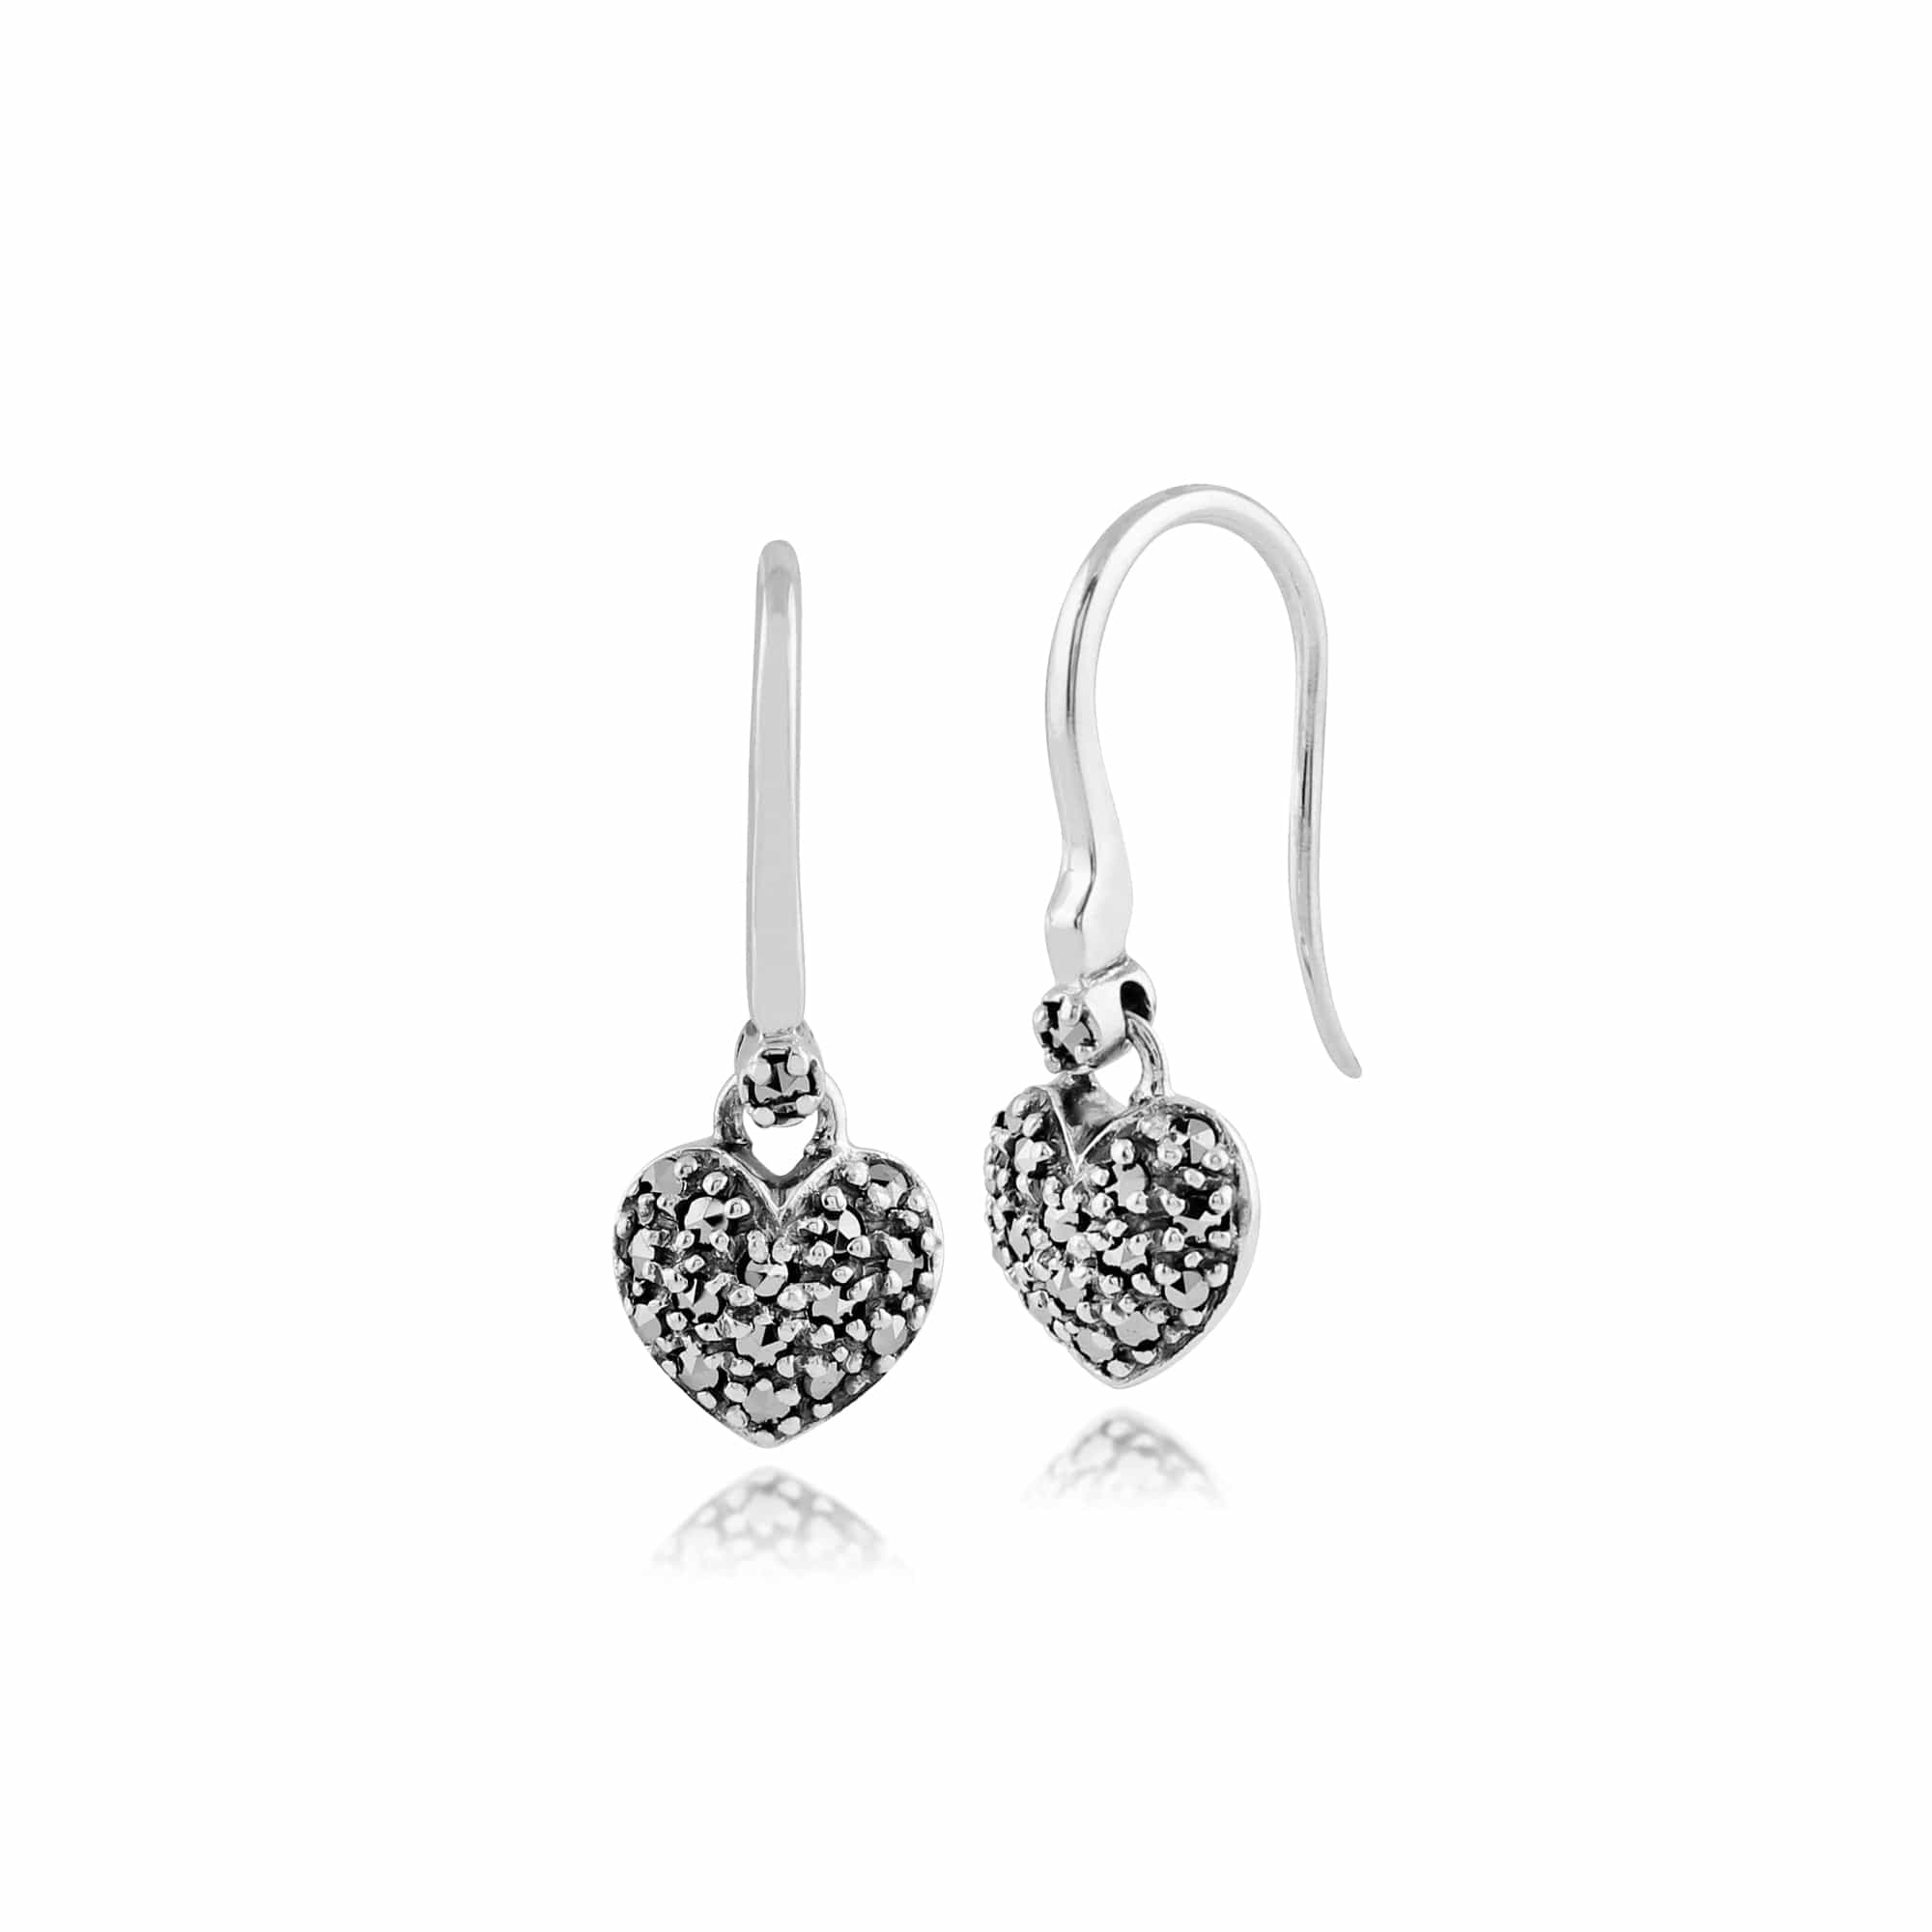 Photos - Earrings Classic Round Marcasite Heart Drop  in 925 Sterling Silver